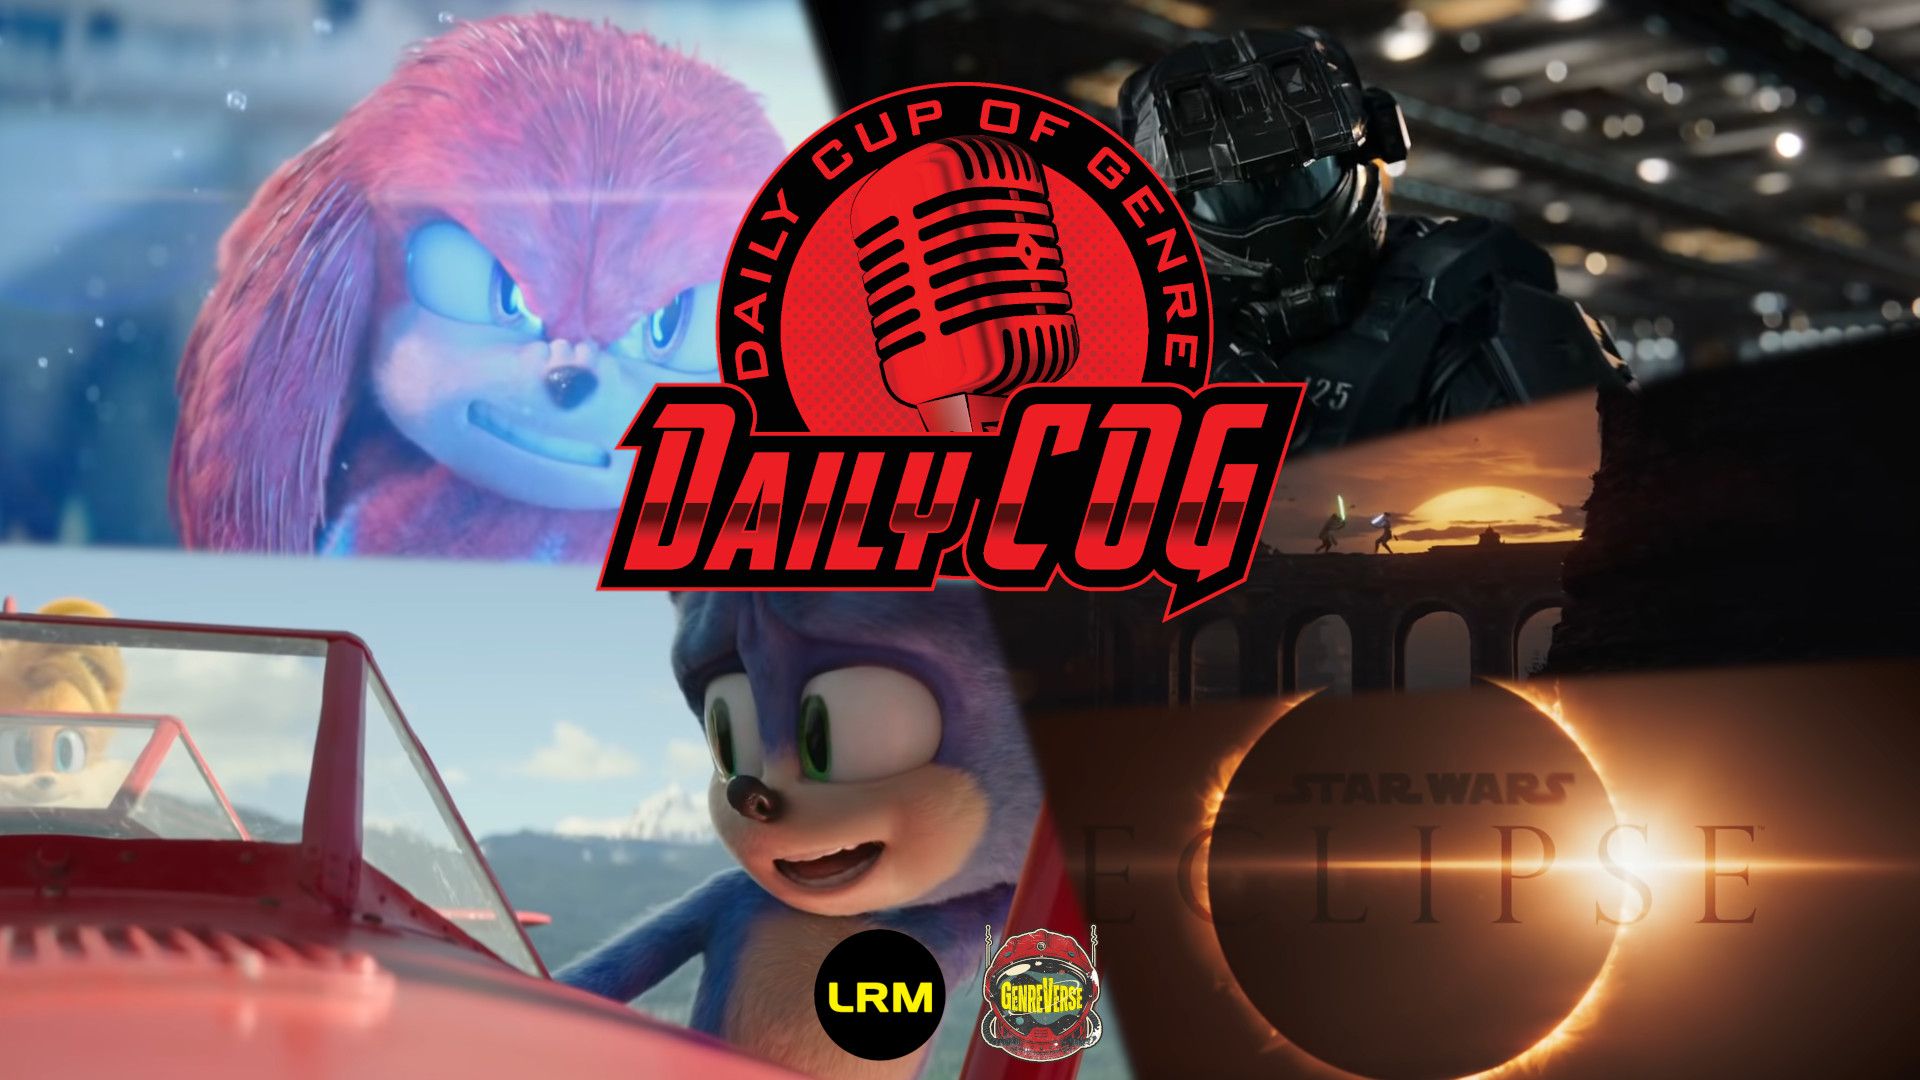 Sonic The Hedgehog 2 Trailer Reaction, Halo Series Trailer Reaction, Star Wars Eclipse Trailer Reaction Daily COG Final